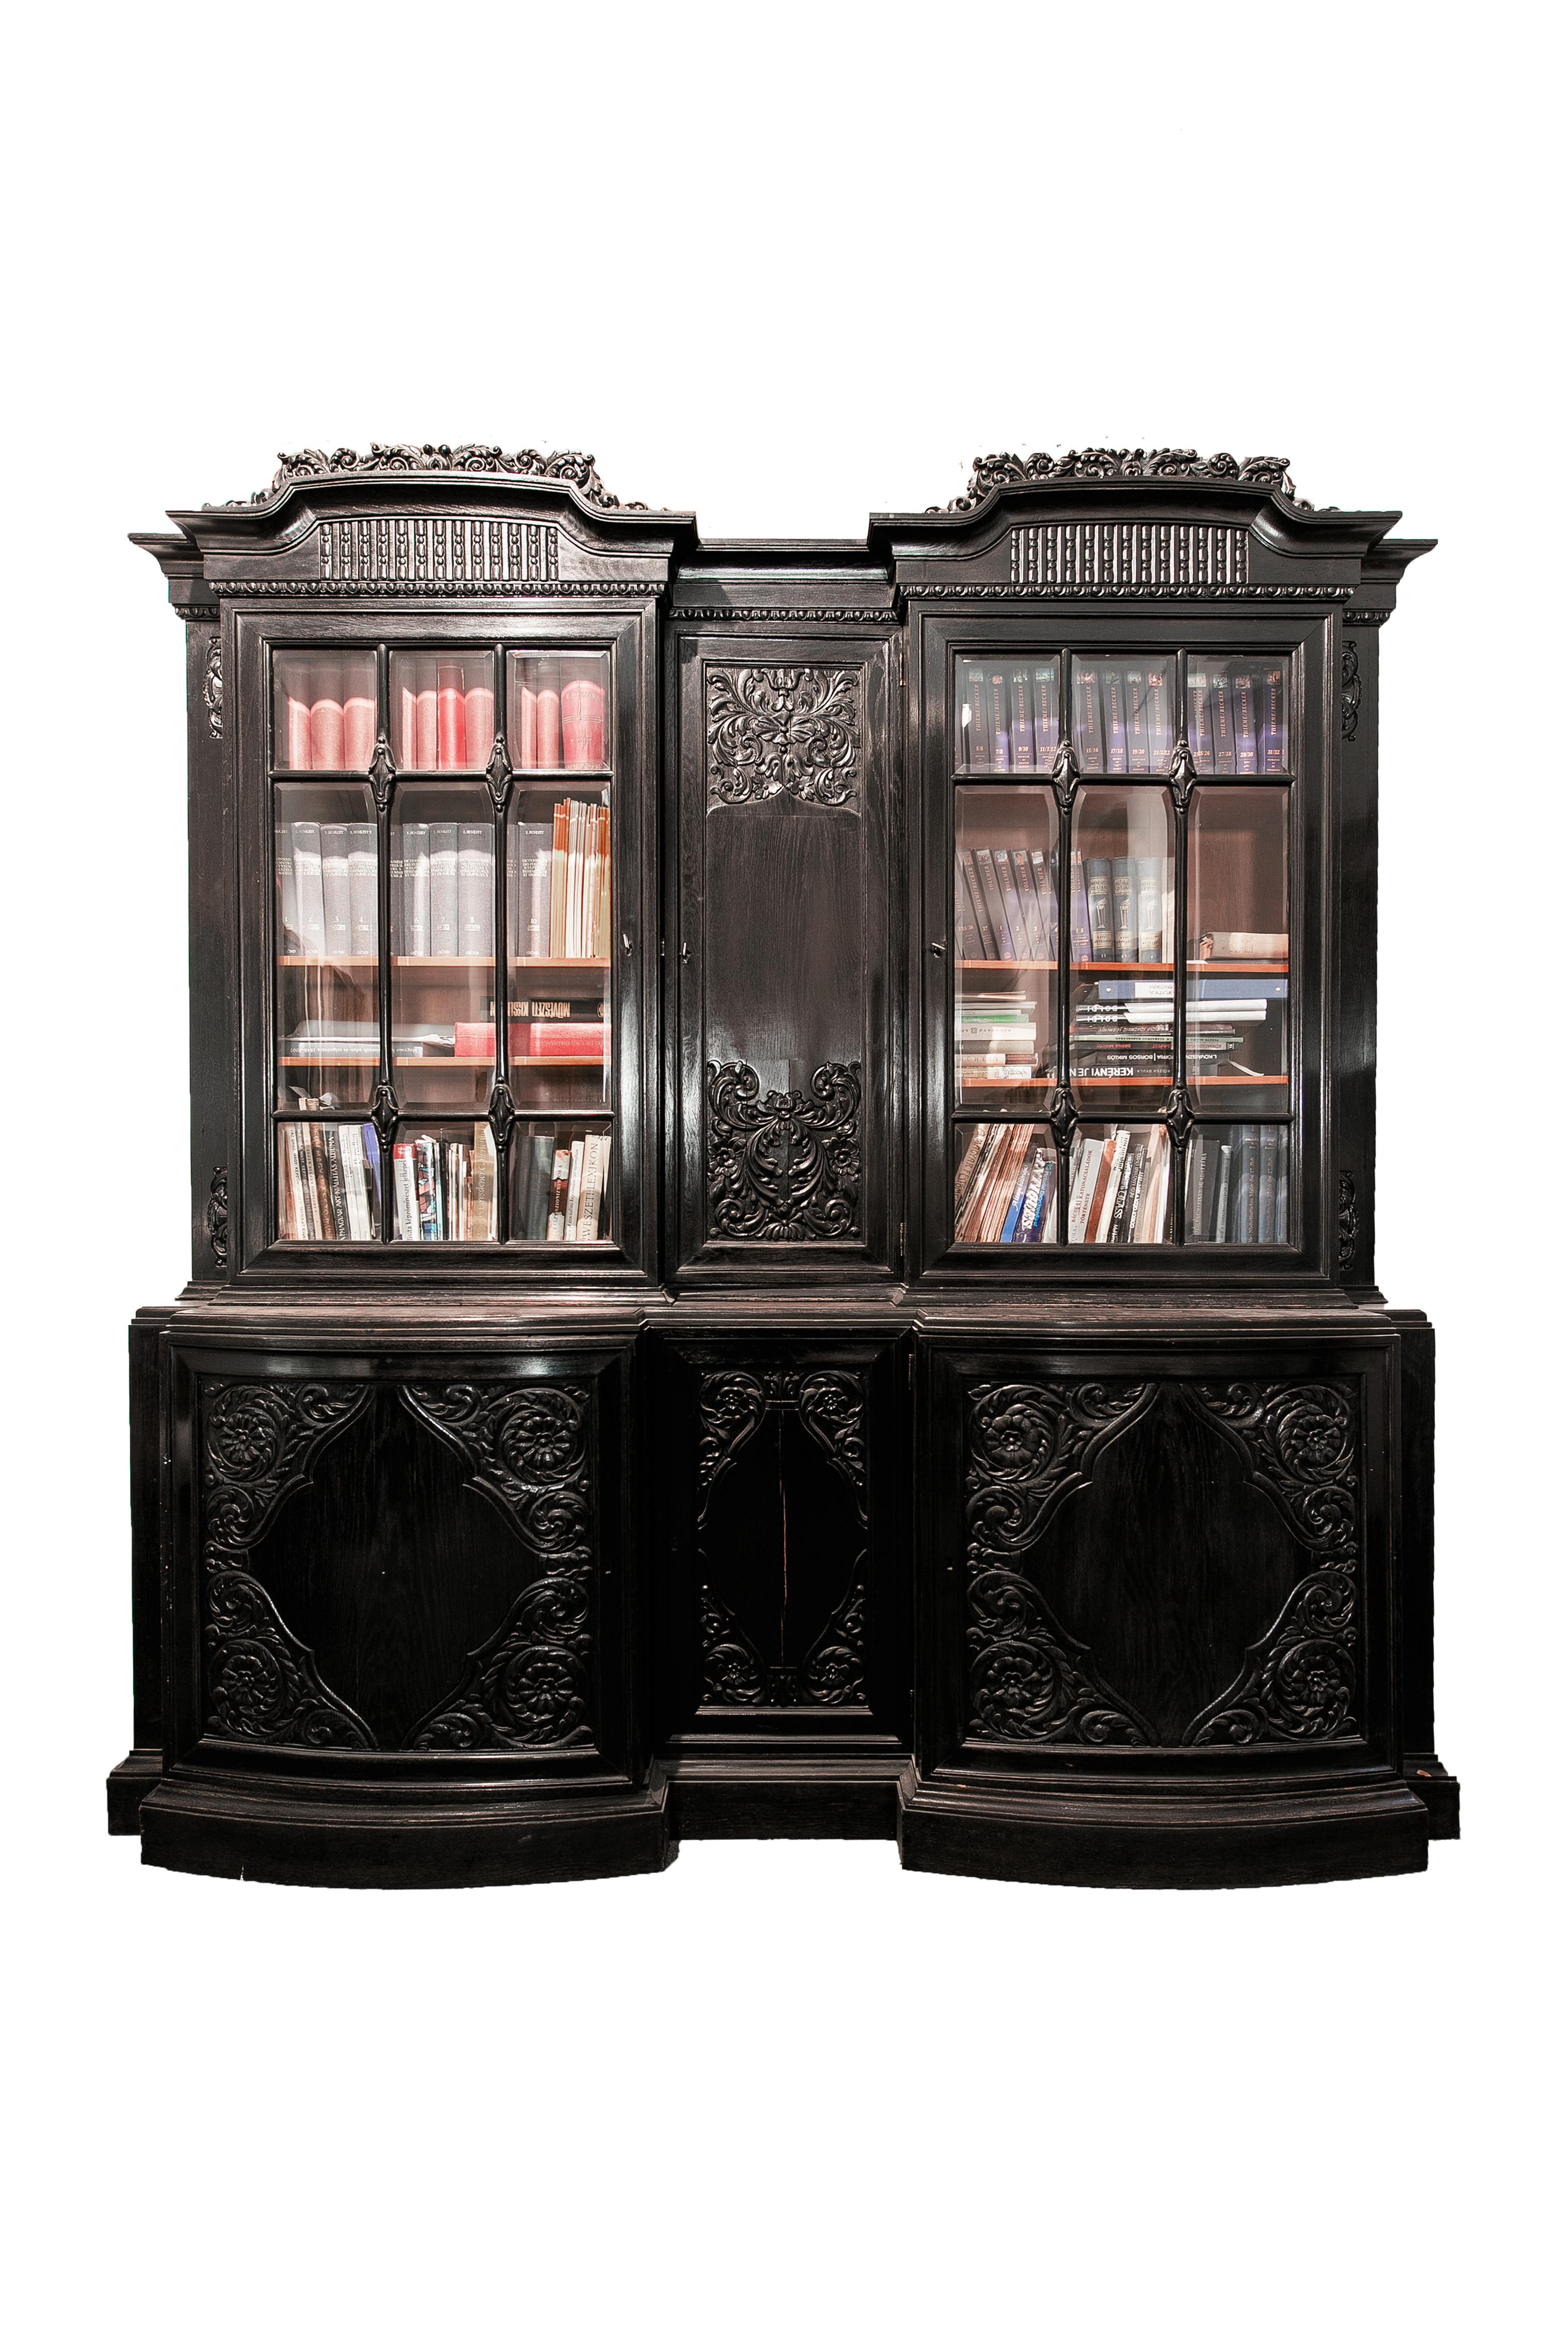 Workingroom ensemble in Eclectic style manufactured around 1920.
Stained black beech in original condition.
The set consists of a bookcase with glass doors, that is supplemented by a desk, a round table and a chair, with the following